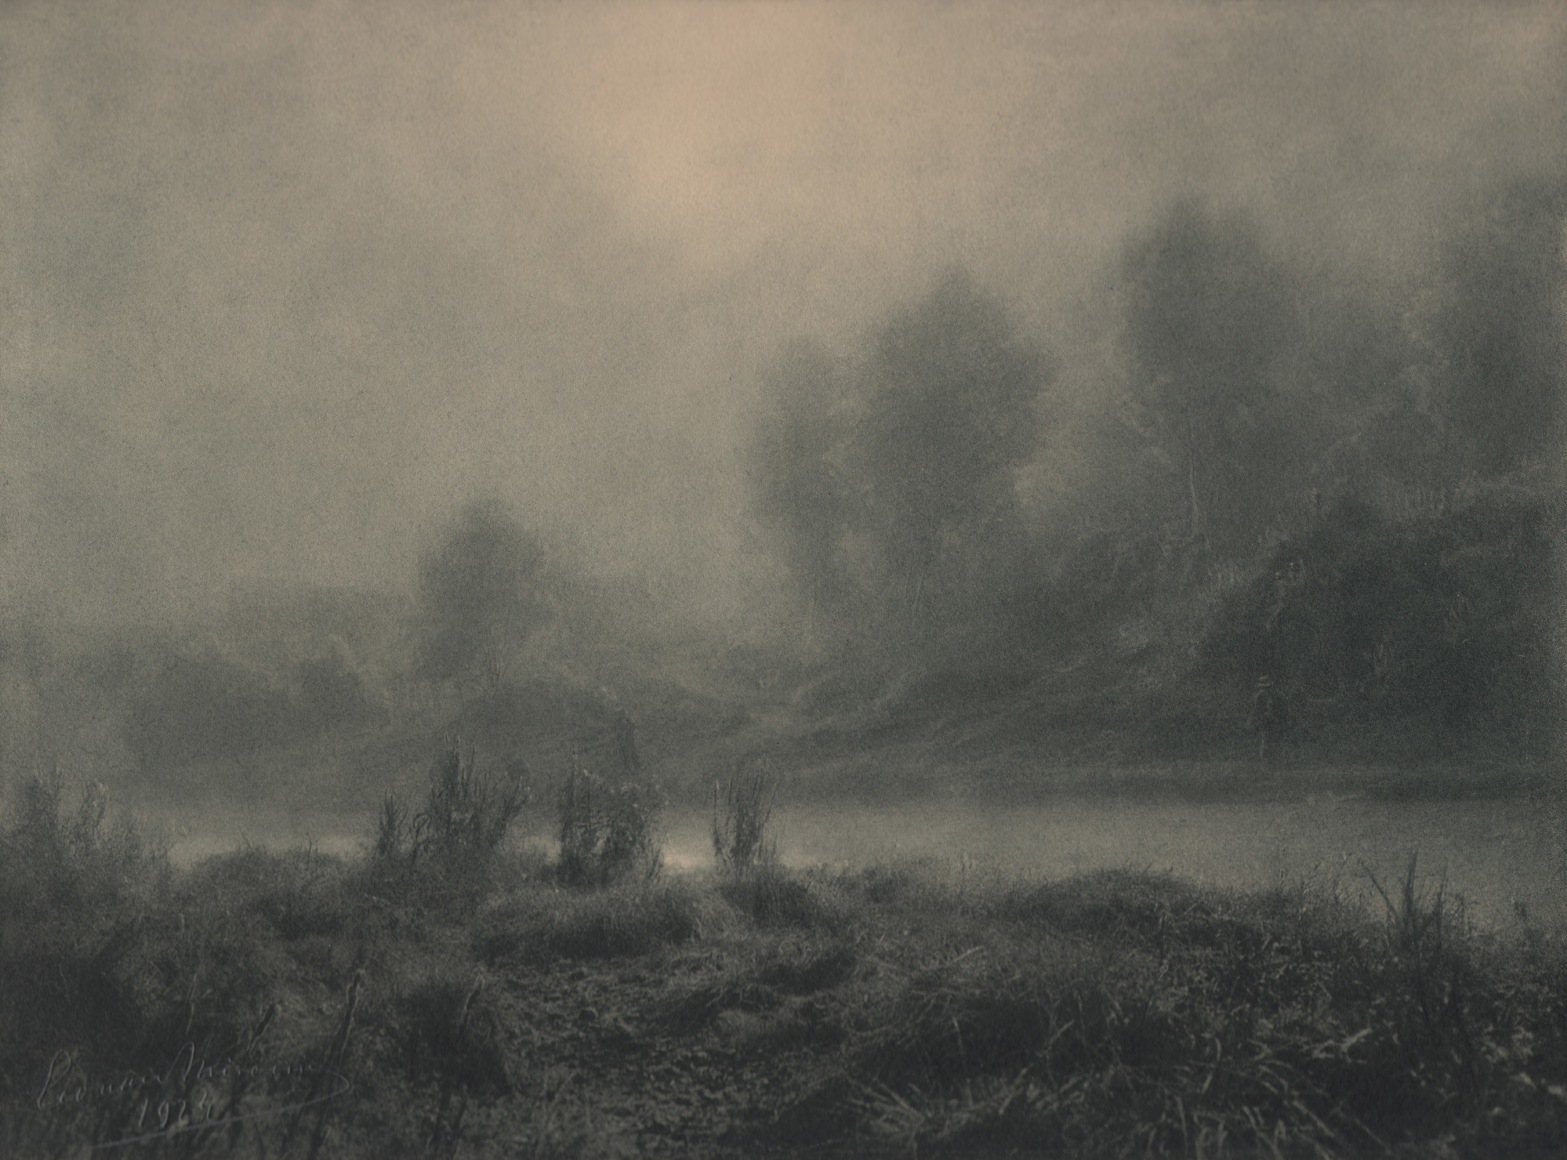 13. L&eacute;onard Misonne, Lever de soleil, c. 1924. Hazy sunrise alongside a river with brush and trees on either side. Gray/green-toned print.